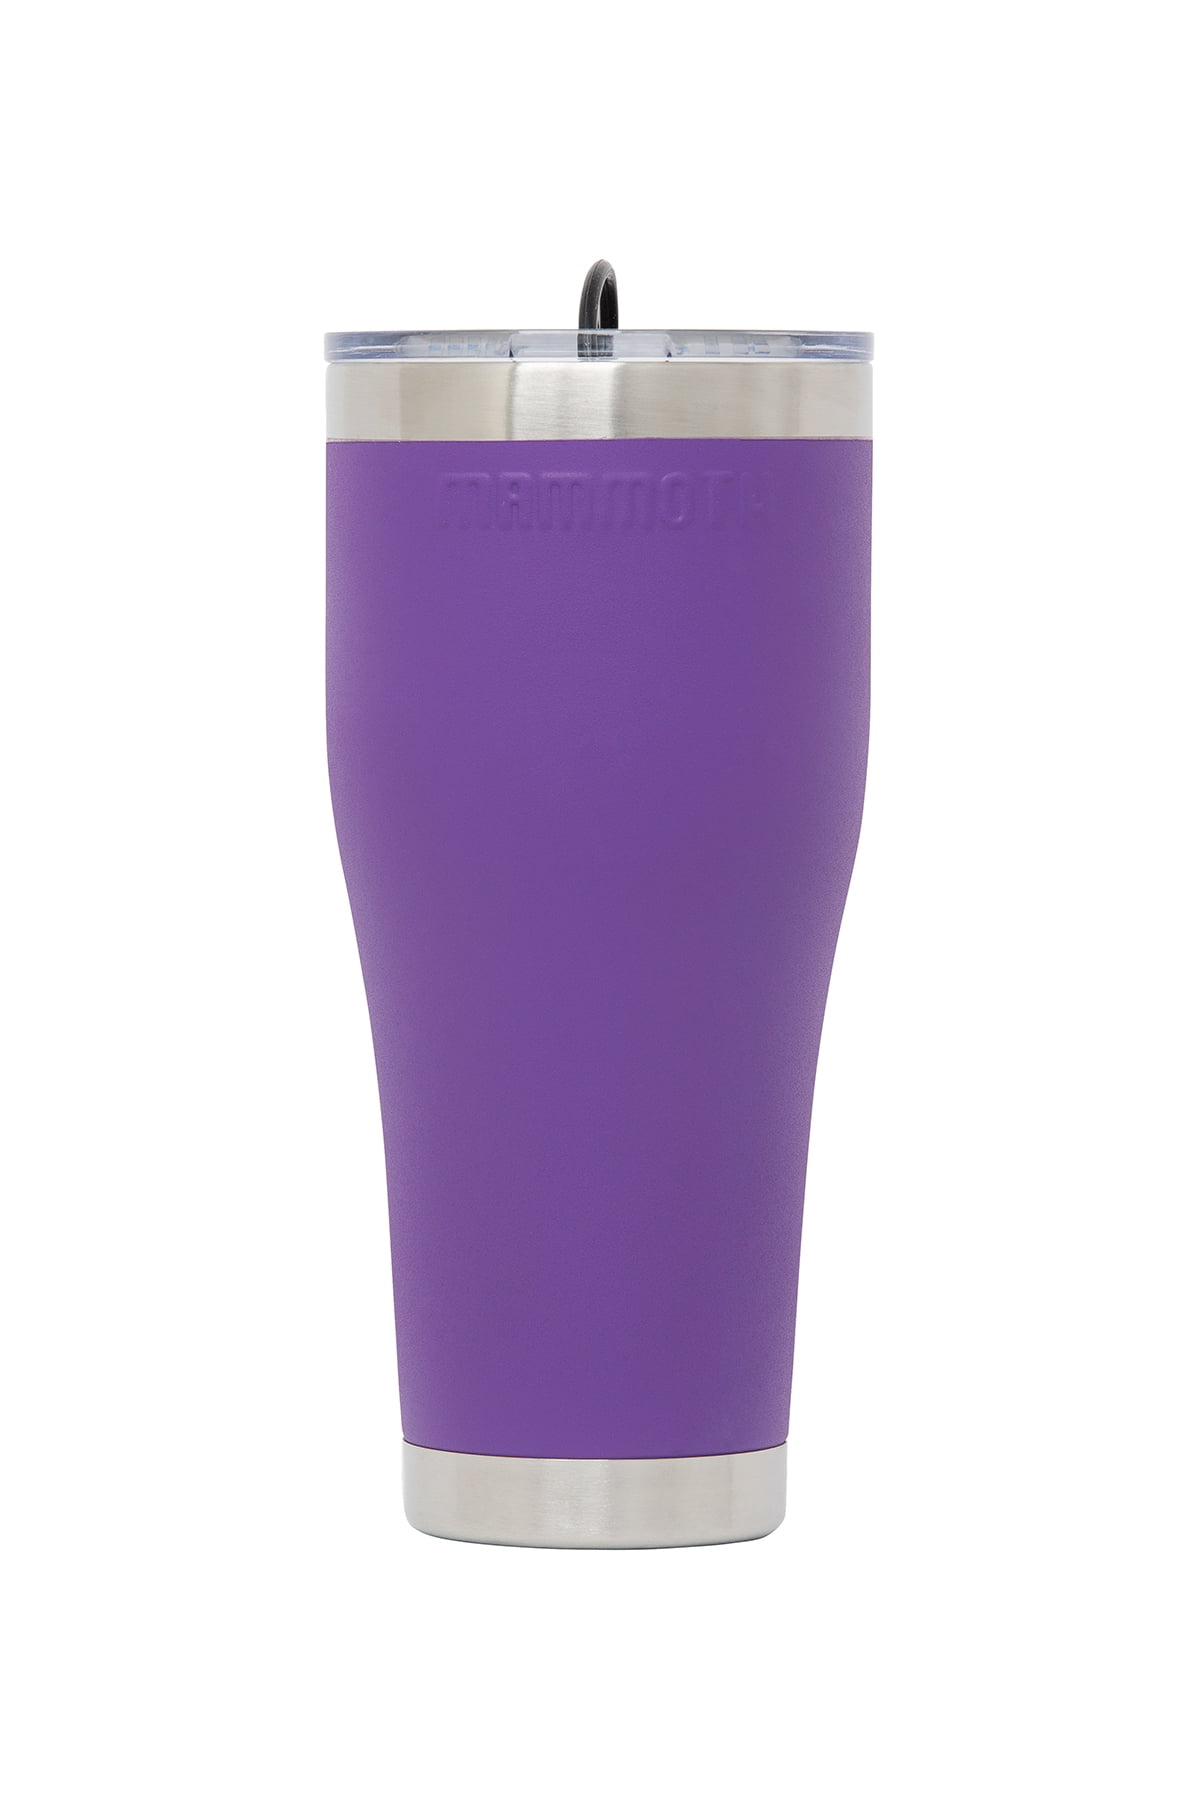 Purple Heart Ribbon Stainless Steel Insulated Tumbler Person